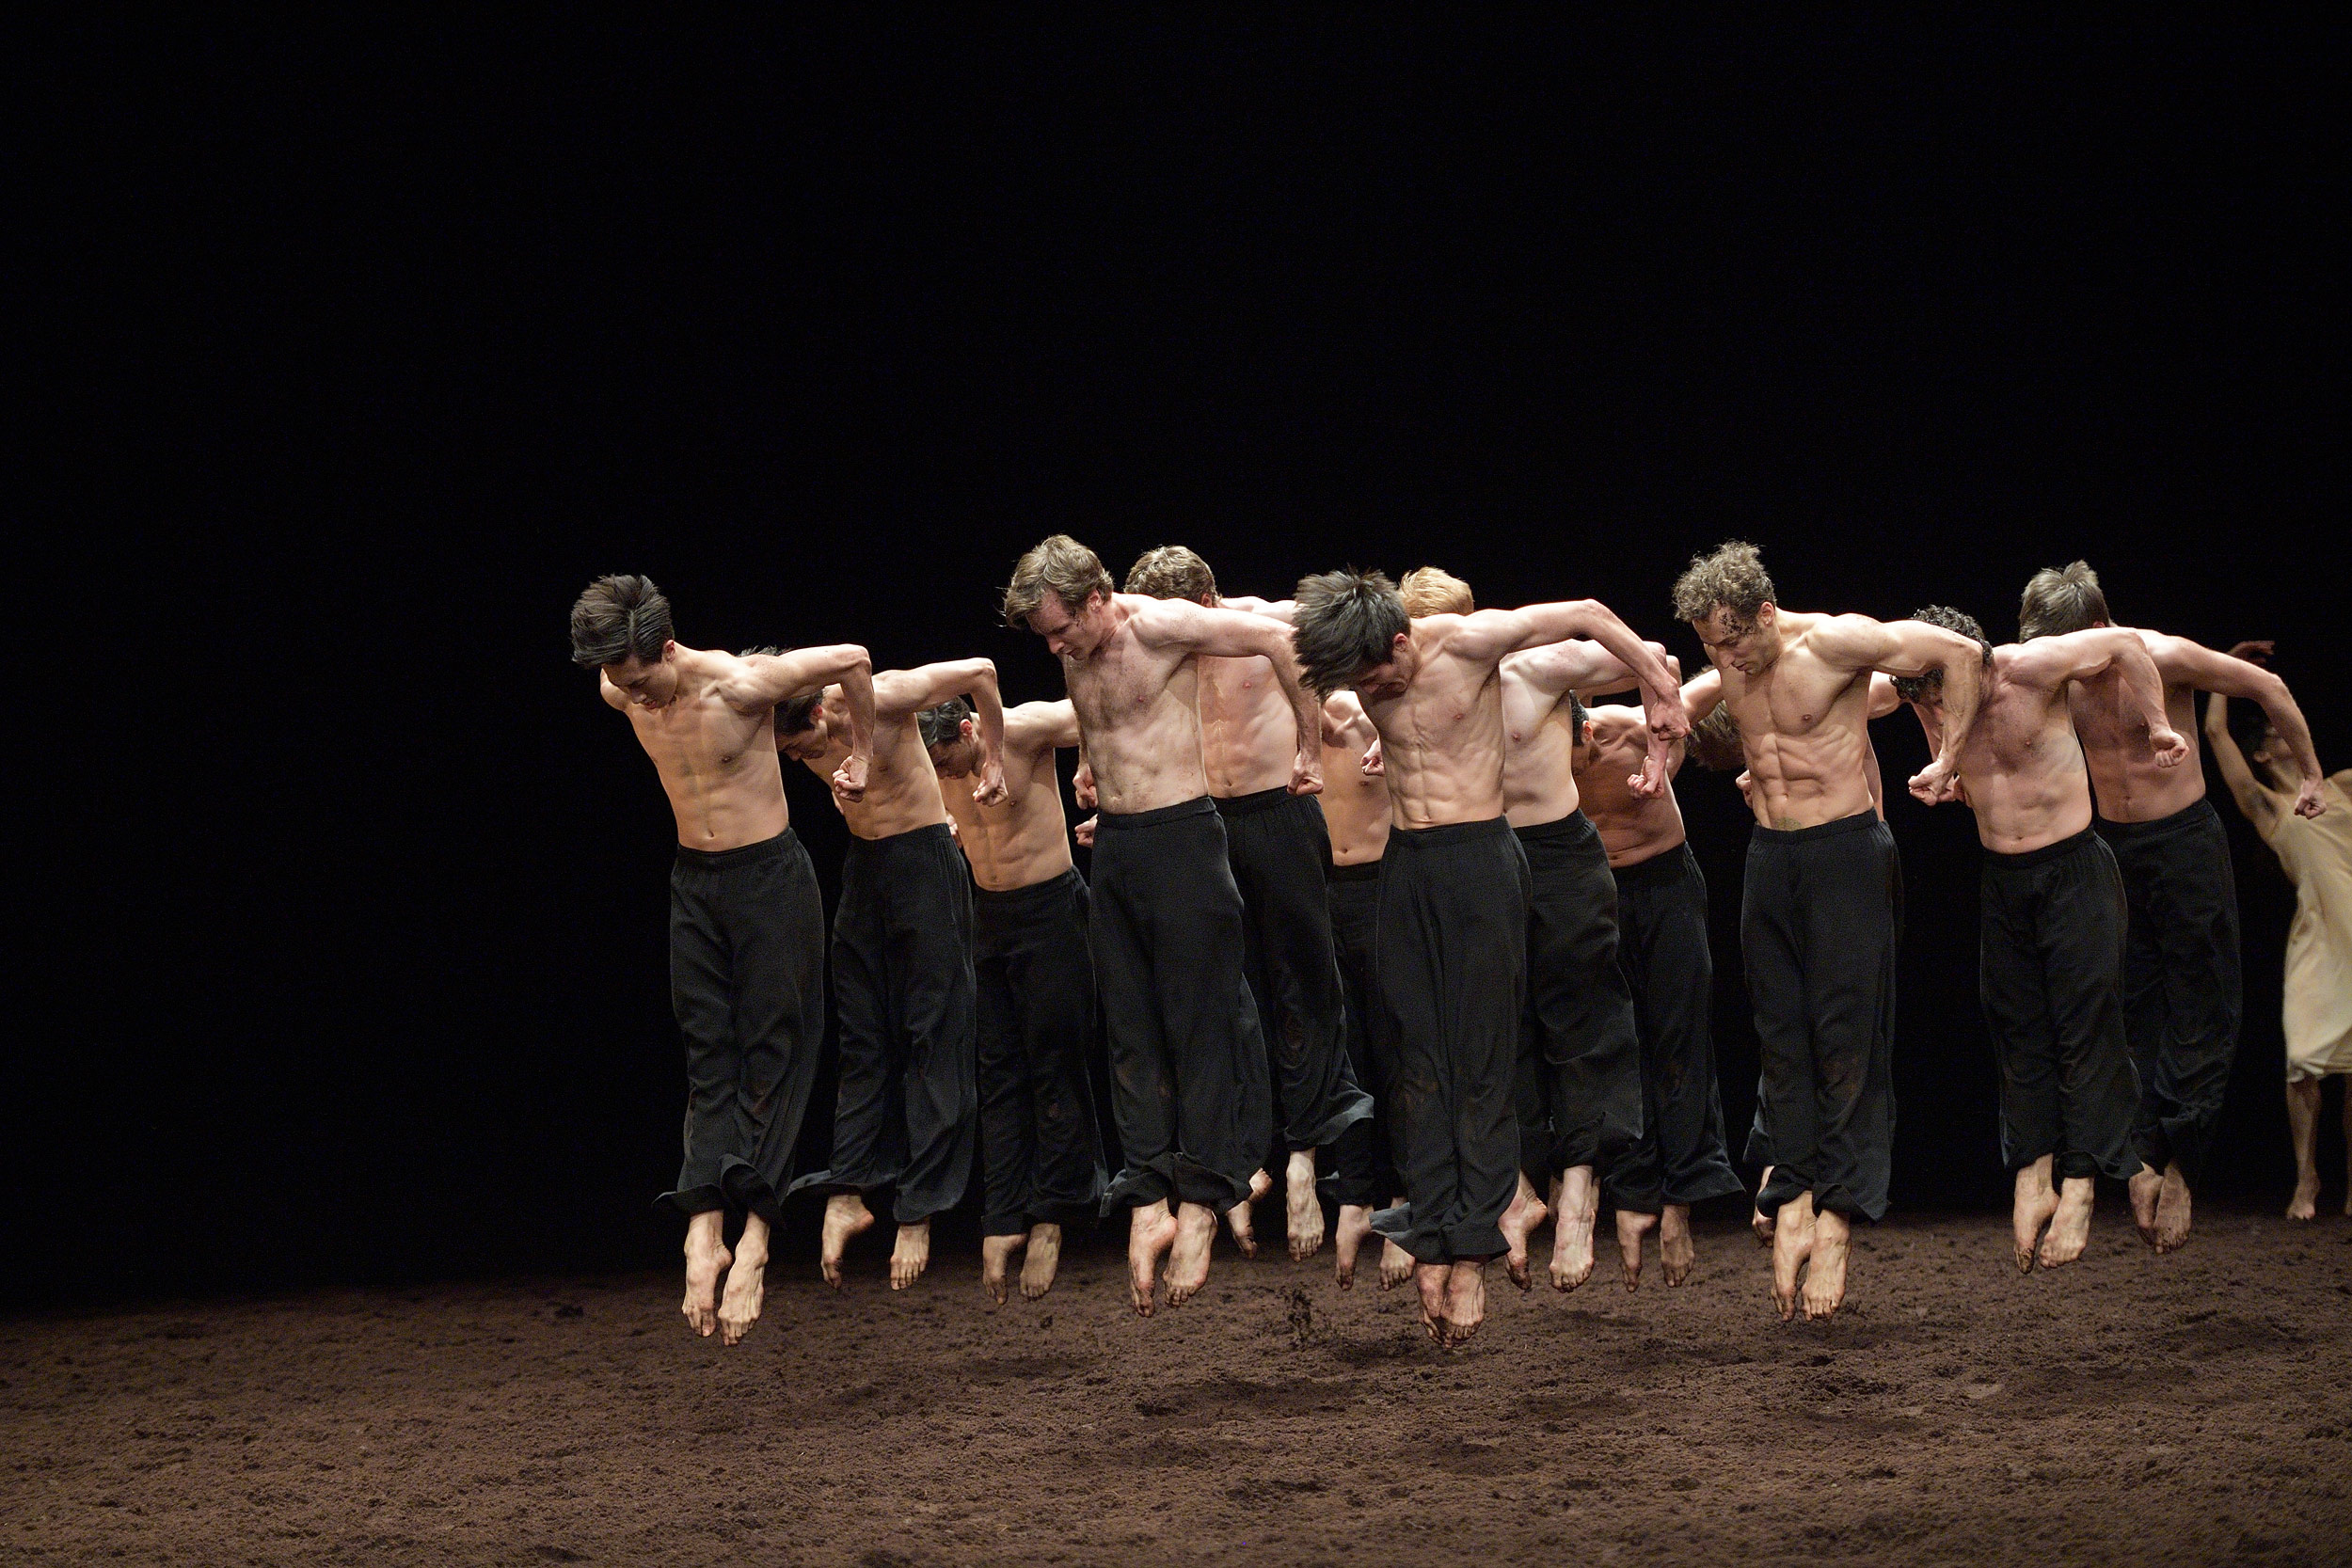 English National Ballet in Pina Bauch's Le Sacre du printemps (The Rite of Spring)